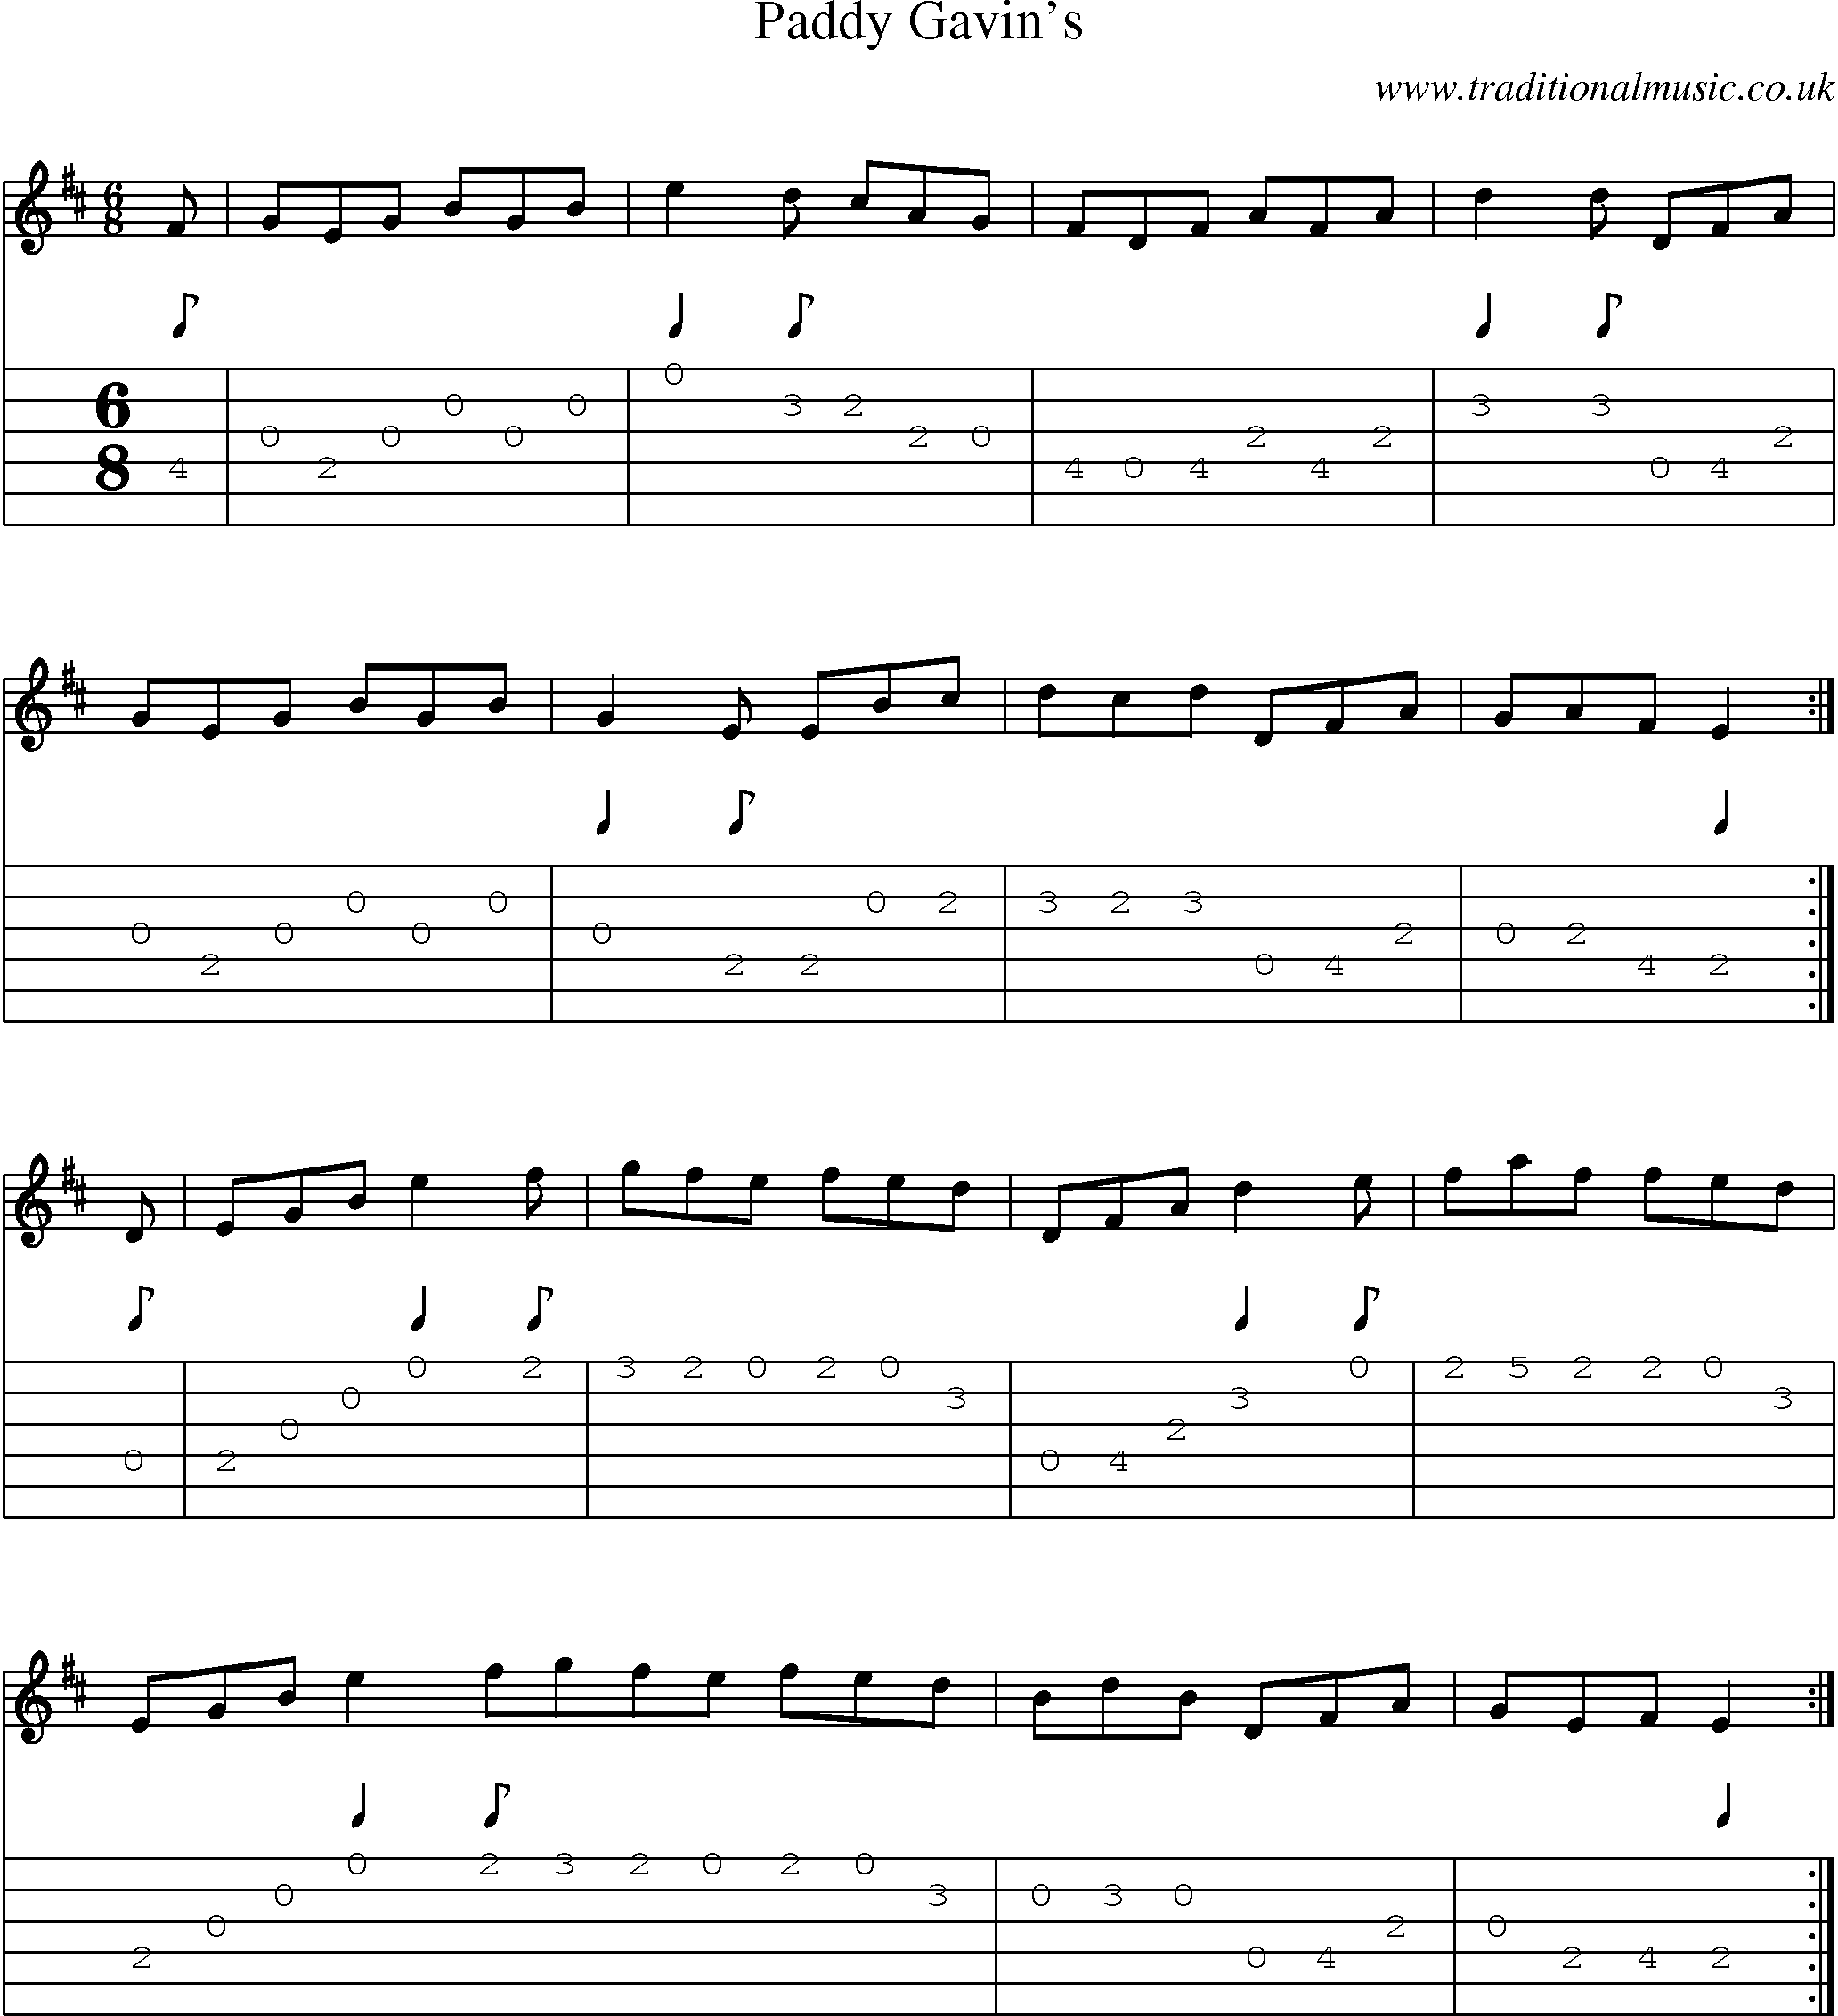 Music Score and Guitar Tabs for Paddy Gavins